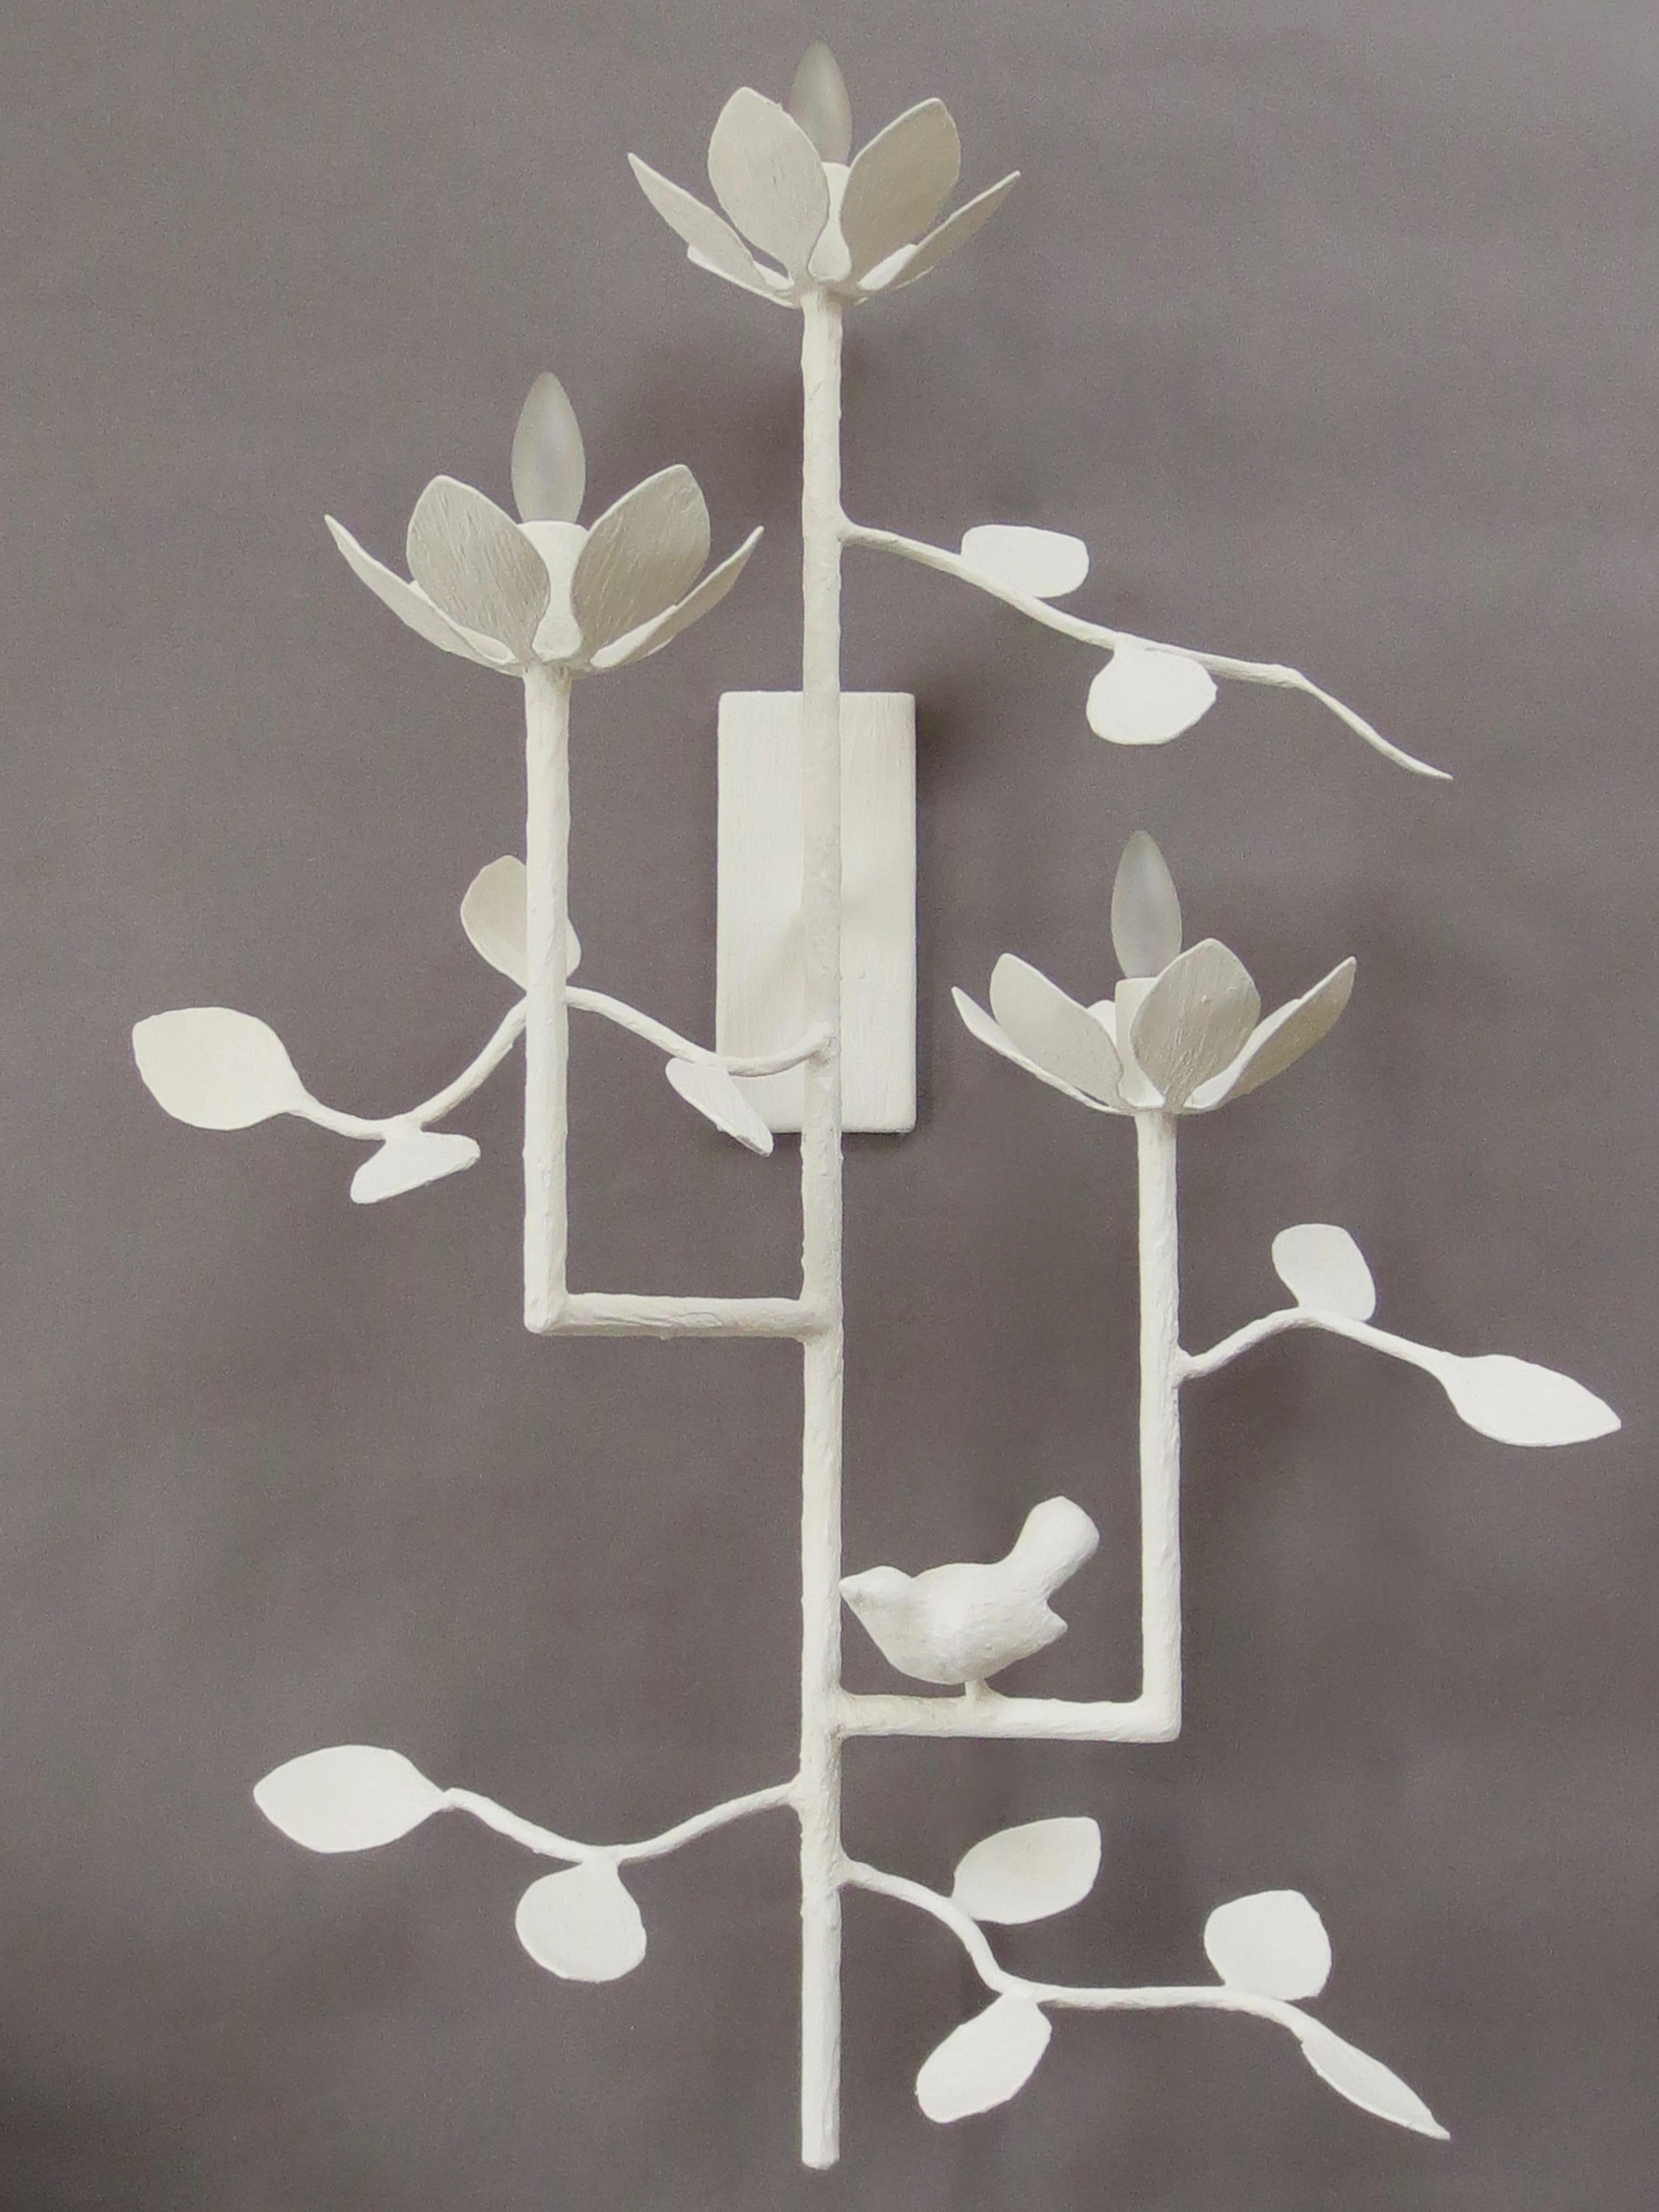 Garden Plaster Sconce  by Tracey Garet of Apsara Interior Design.
The Garden Sconce has 3 blooms on varying levels and is shown in a white plaster. Branches and leaves are detailed throughout with a single bird. Each bloom contains a candelabra